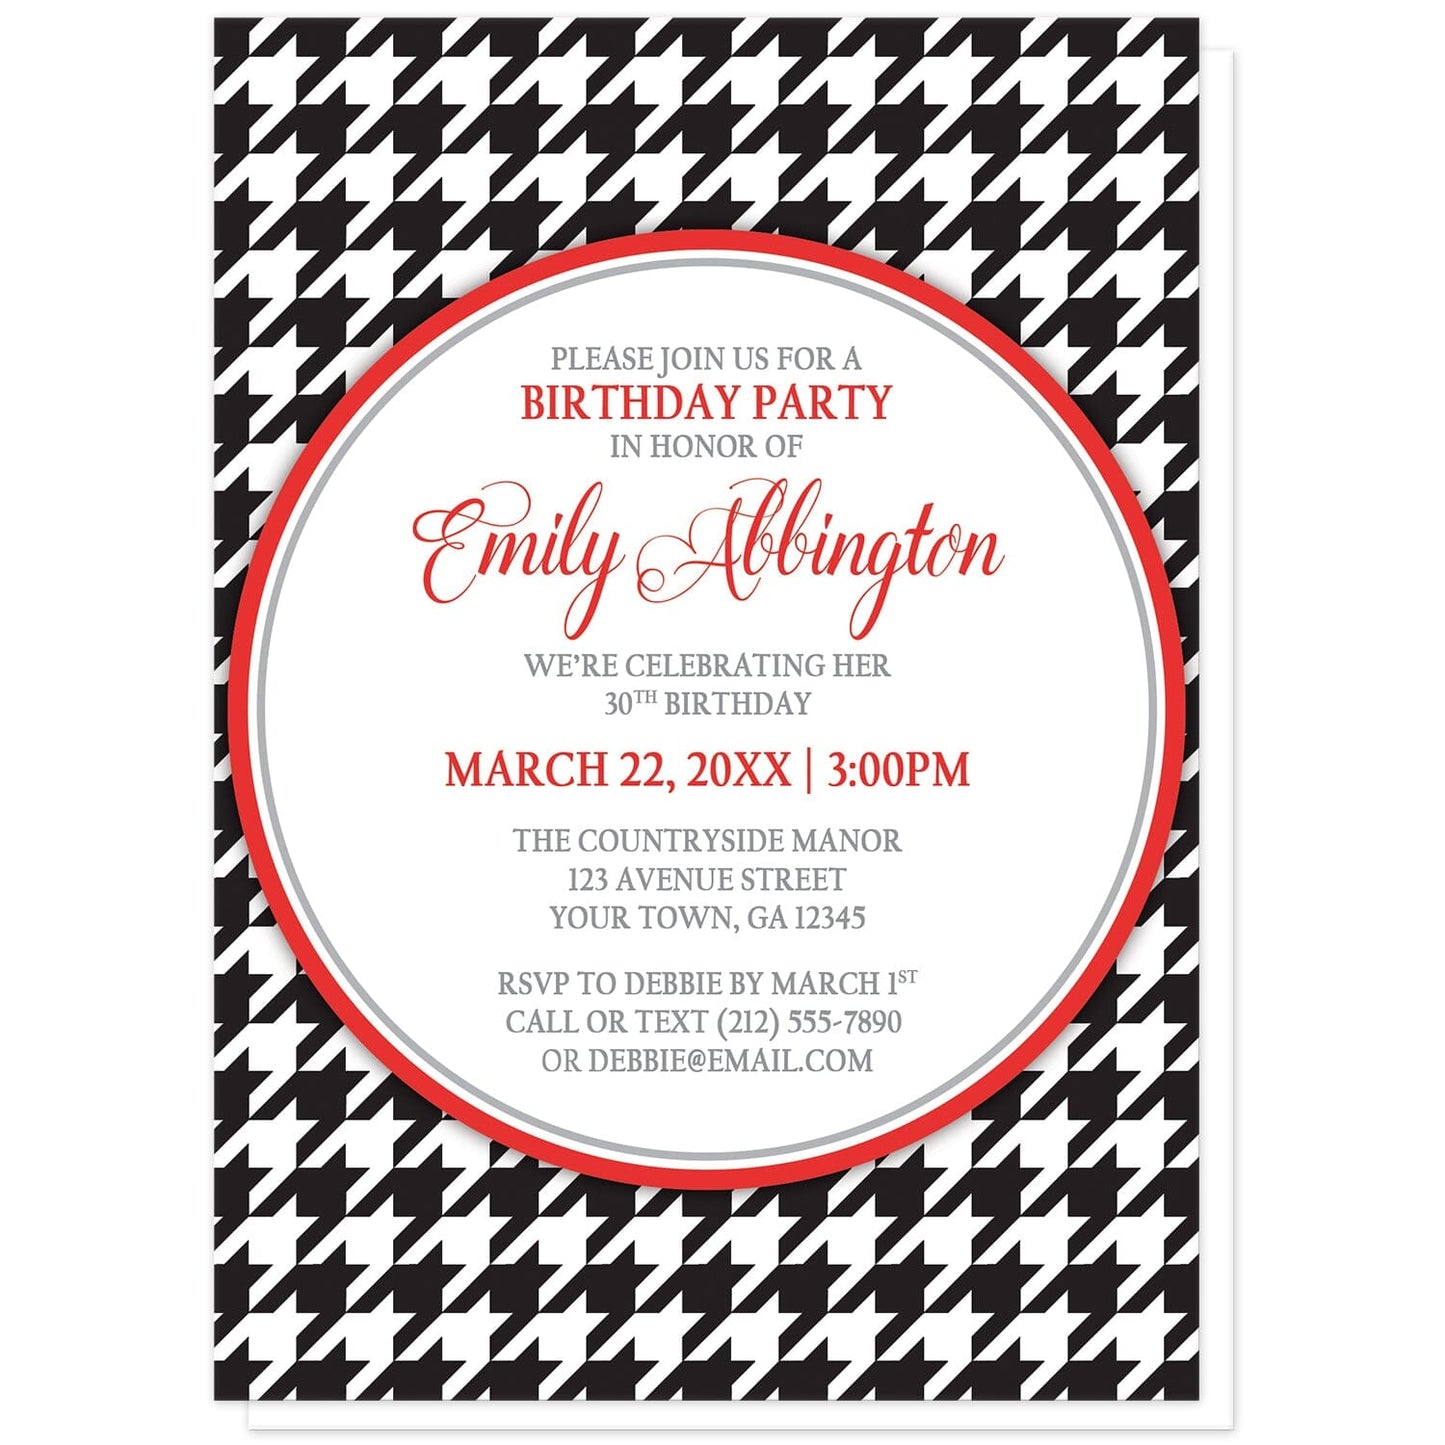 Stylish Black Houndstooth Red Birthday Invitations at Artistically Invited. Stylish black houndstooth red birthday invitations with your personalized birthday party details custom printed in red and gray inside a white circle over a black and white houndstooth pattern. 